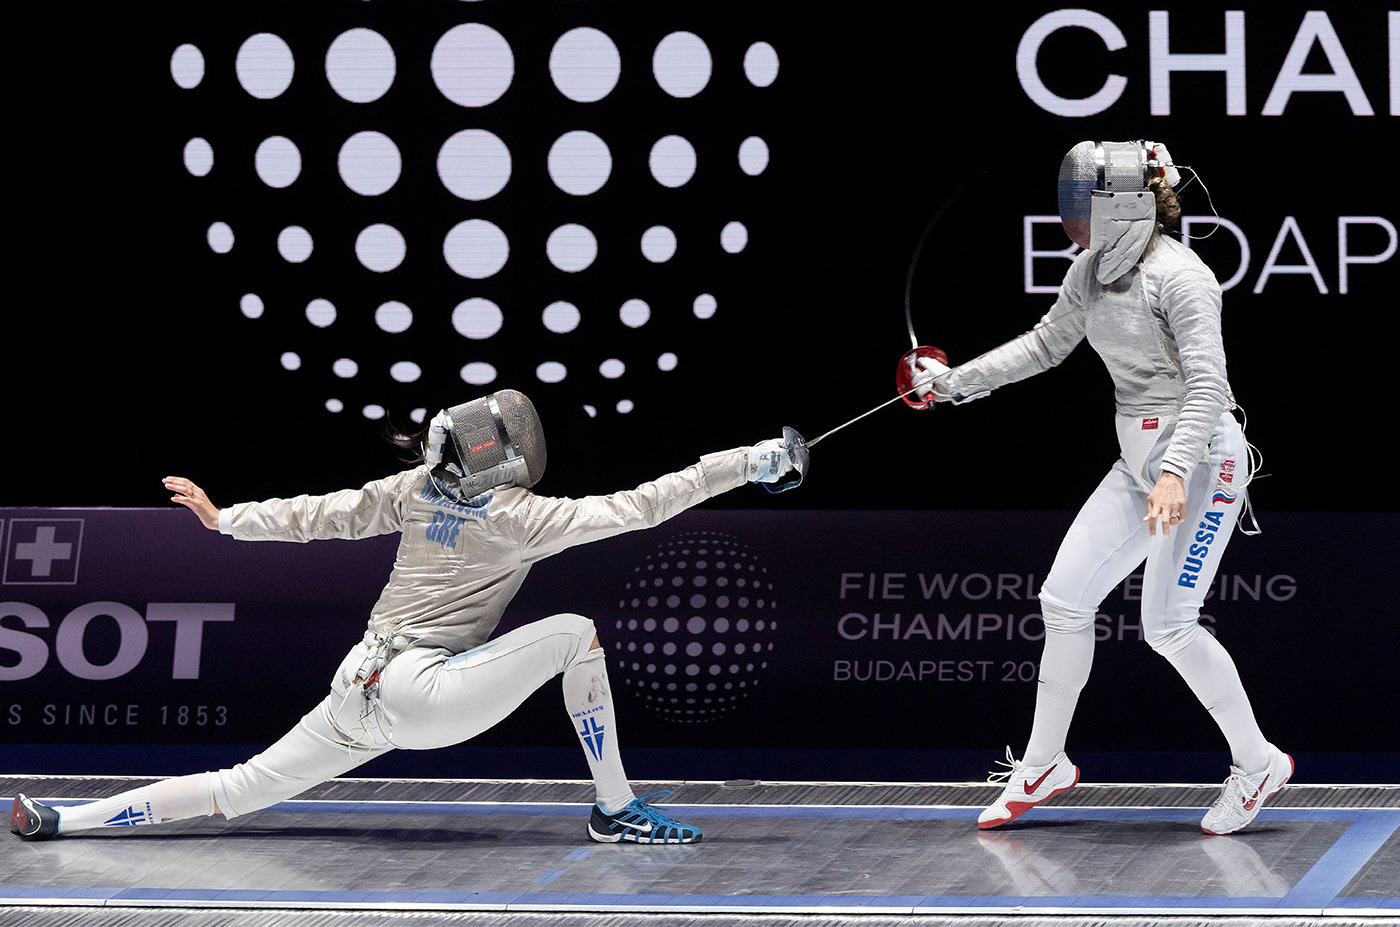 2019 World Fencing Championships Event Graphics 03 